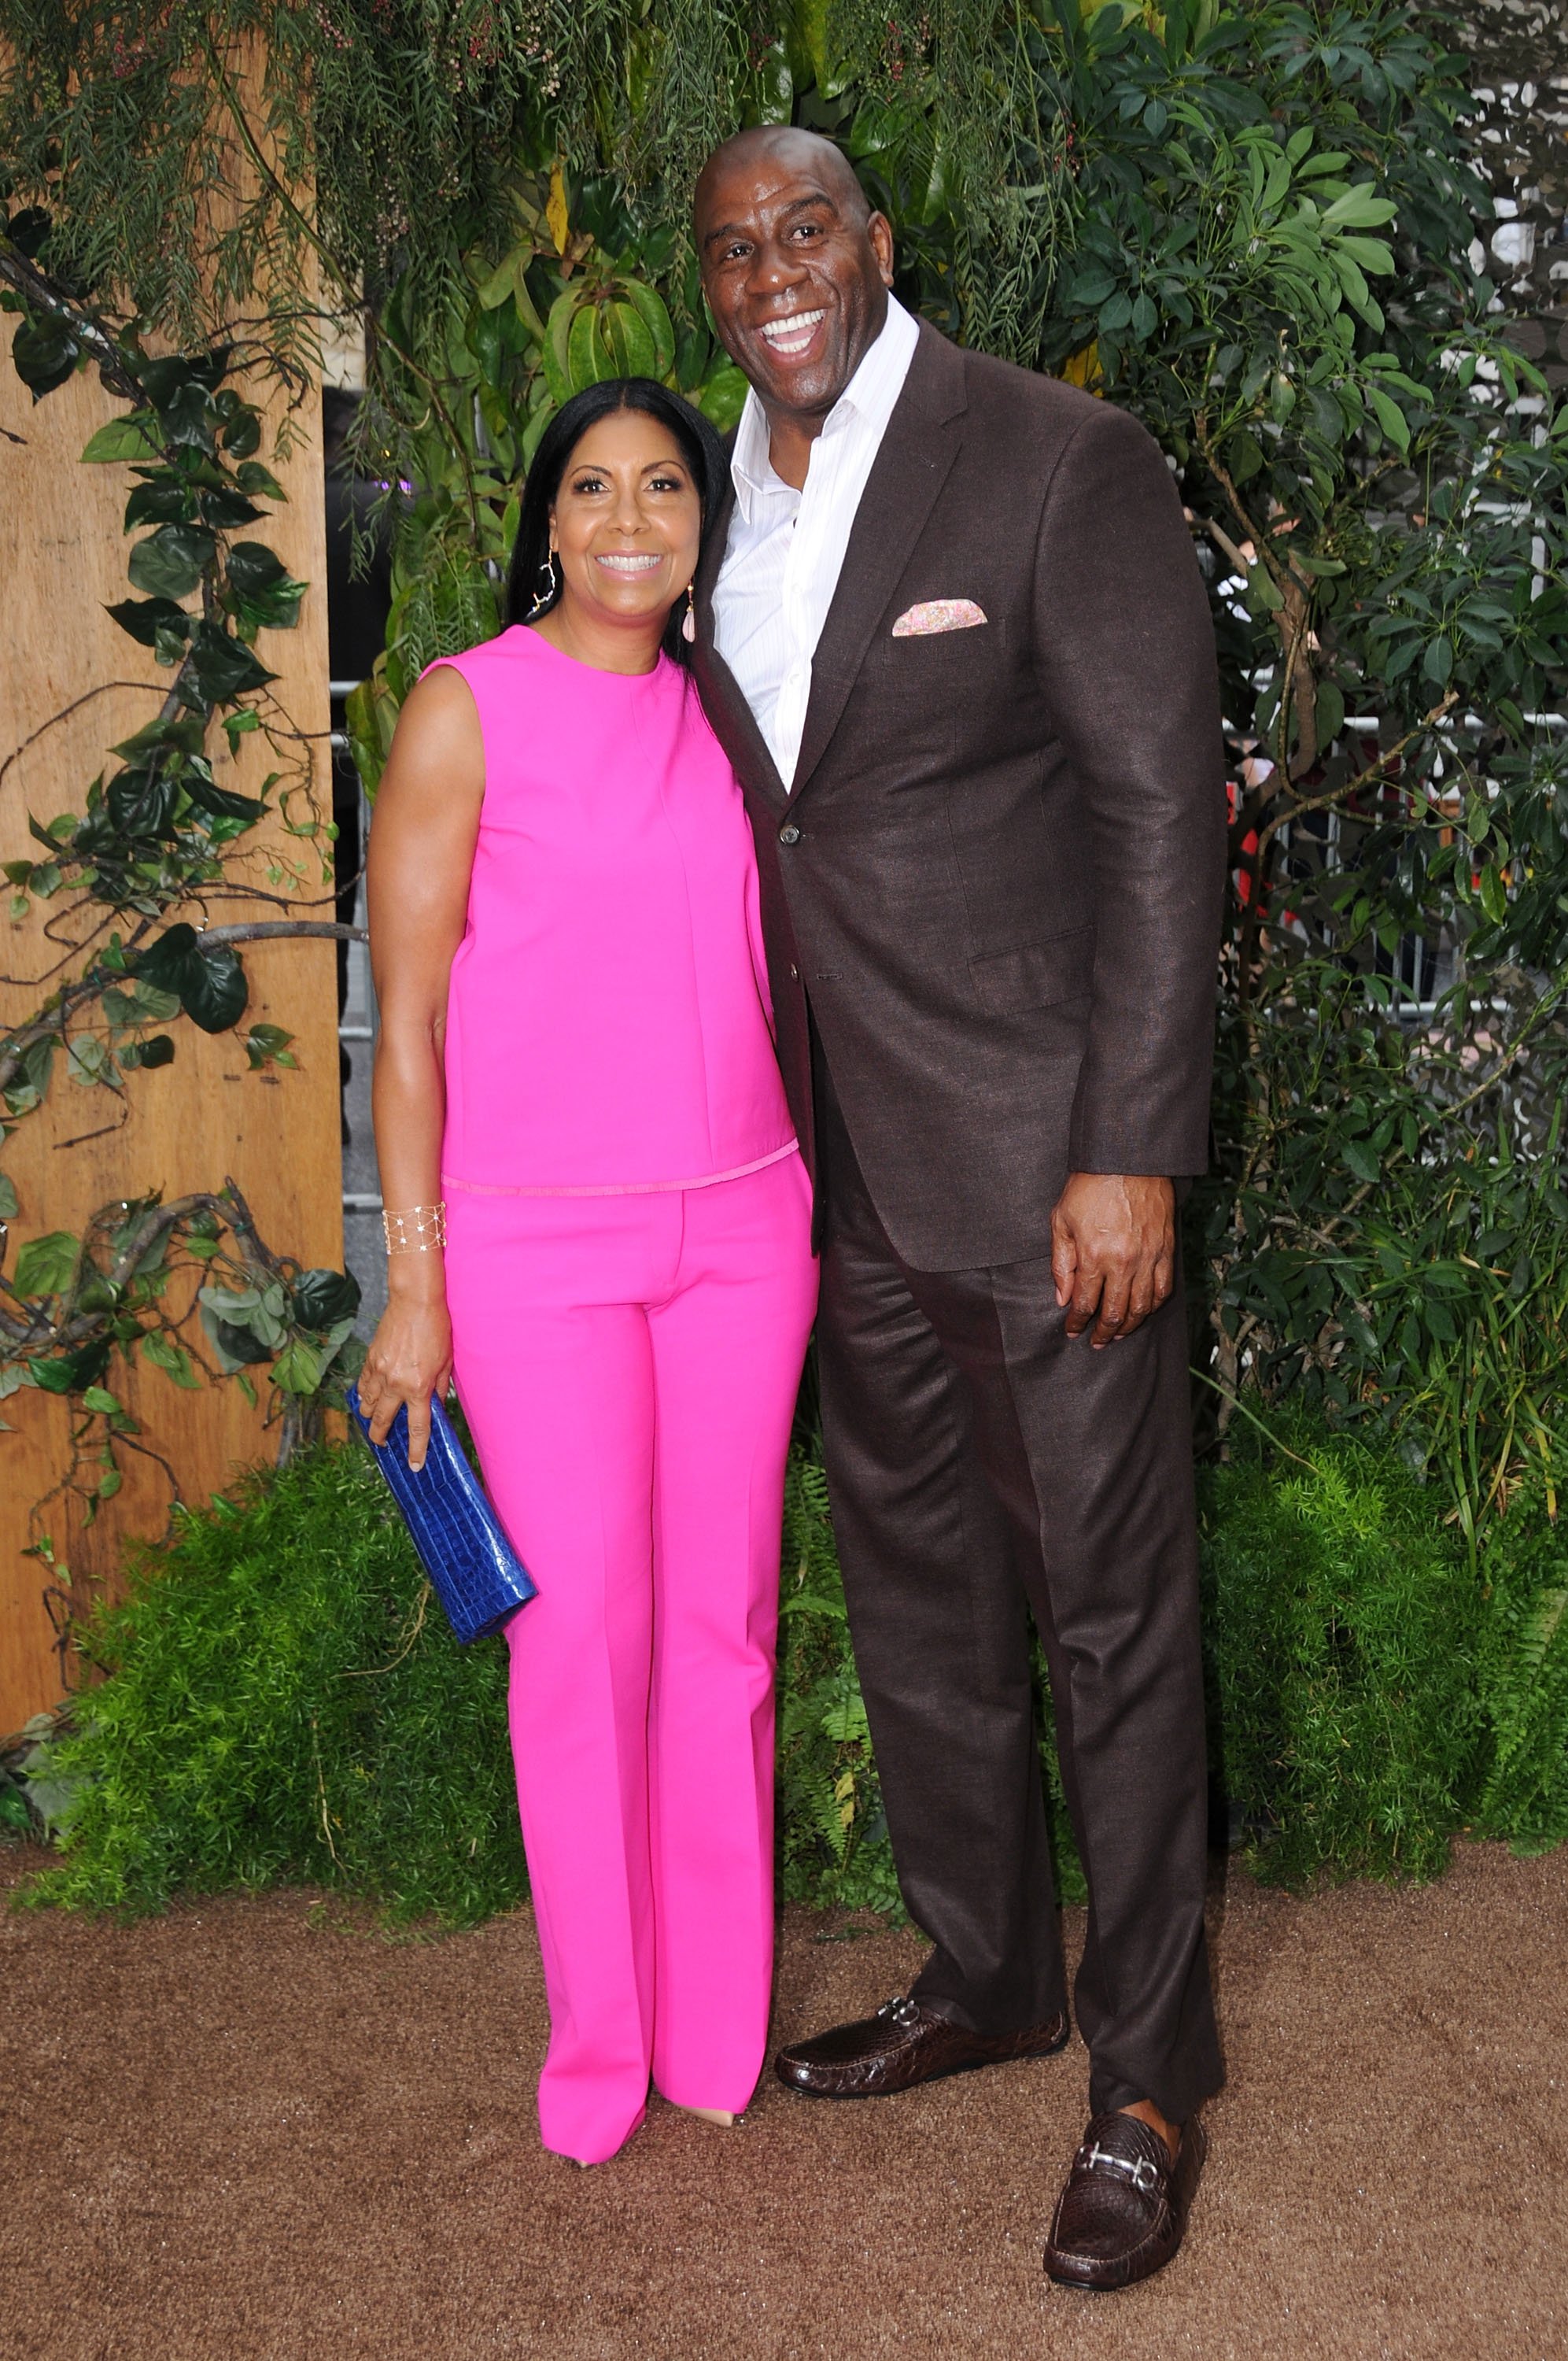 Cookie Johnson and Magic Johnson at the' 'The Legend Of Tarzan' premiere at the TCL Chinese Theatre on June 27, 2016 in Hollywood, California.|Source: Getty Images